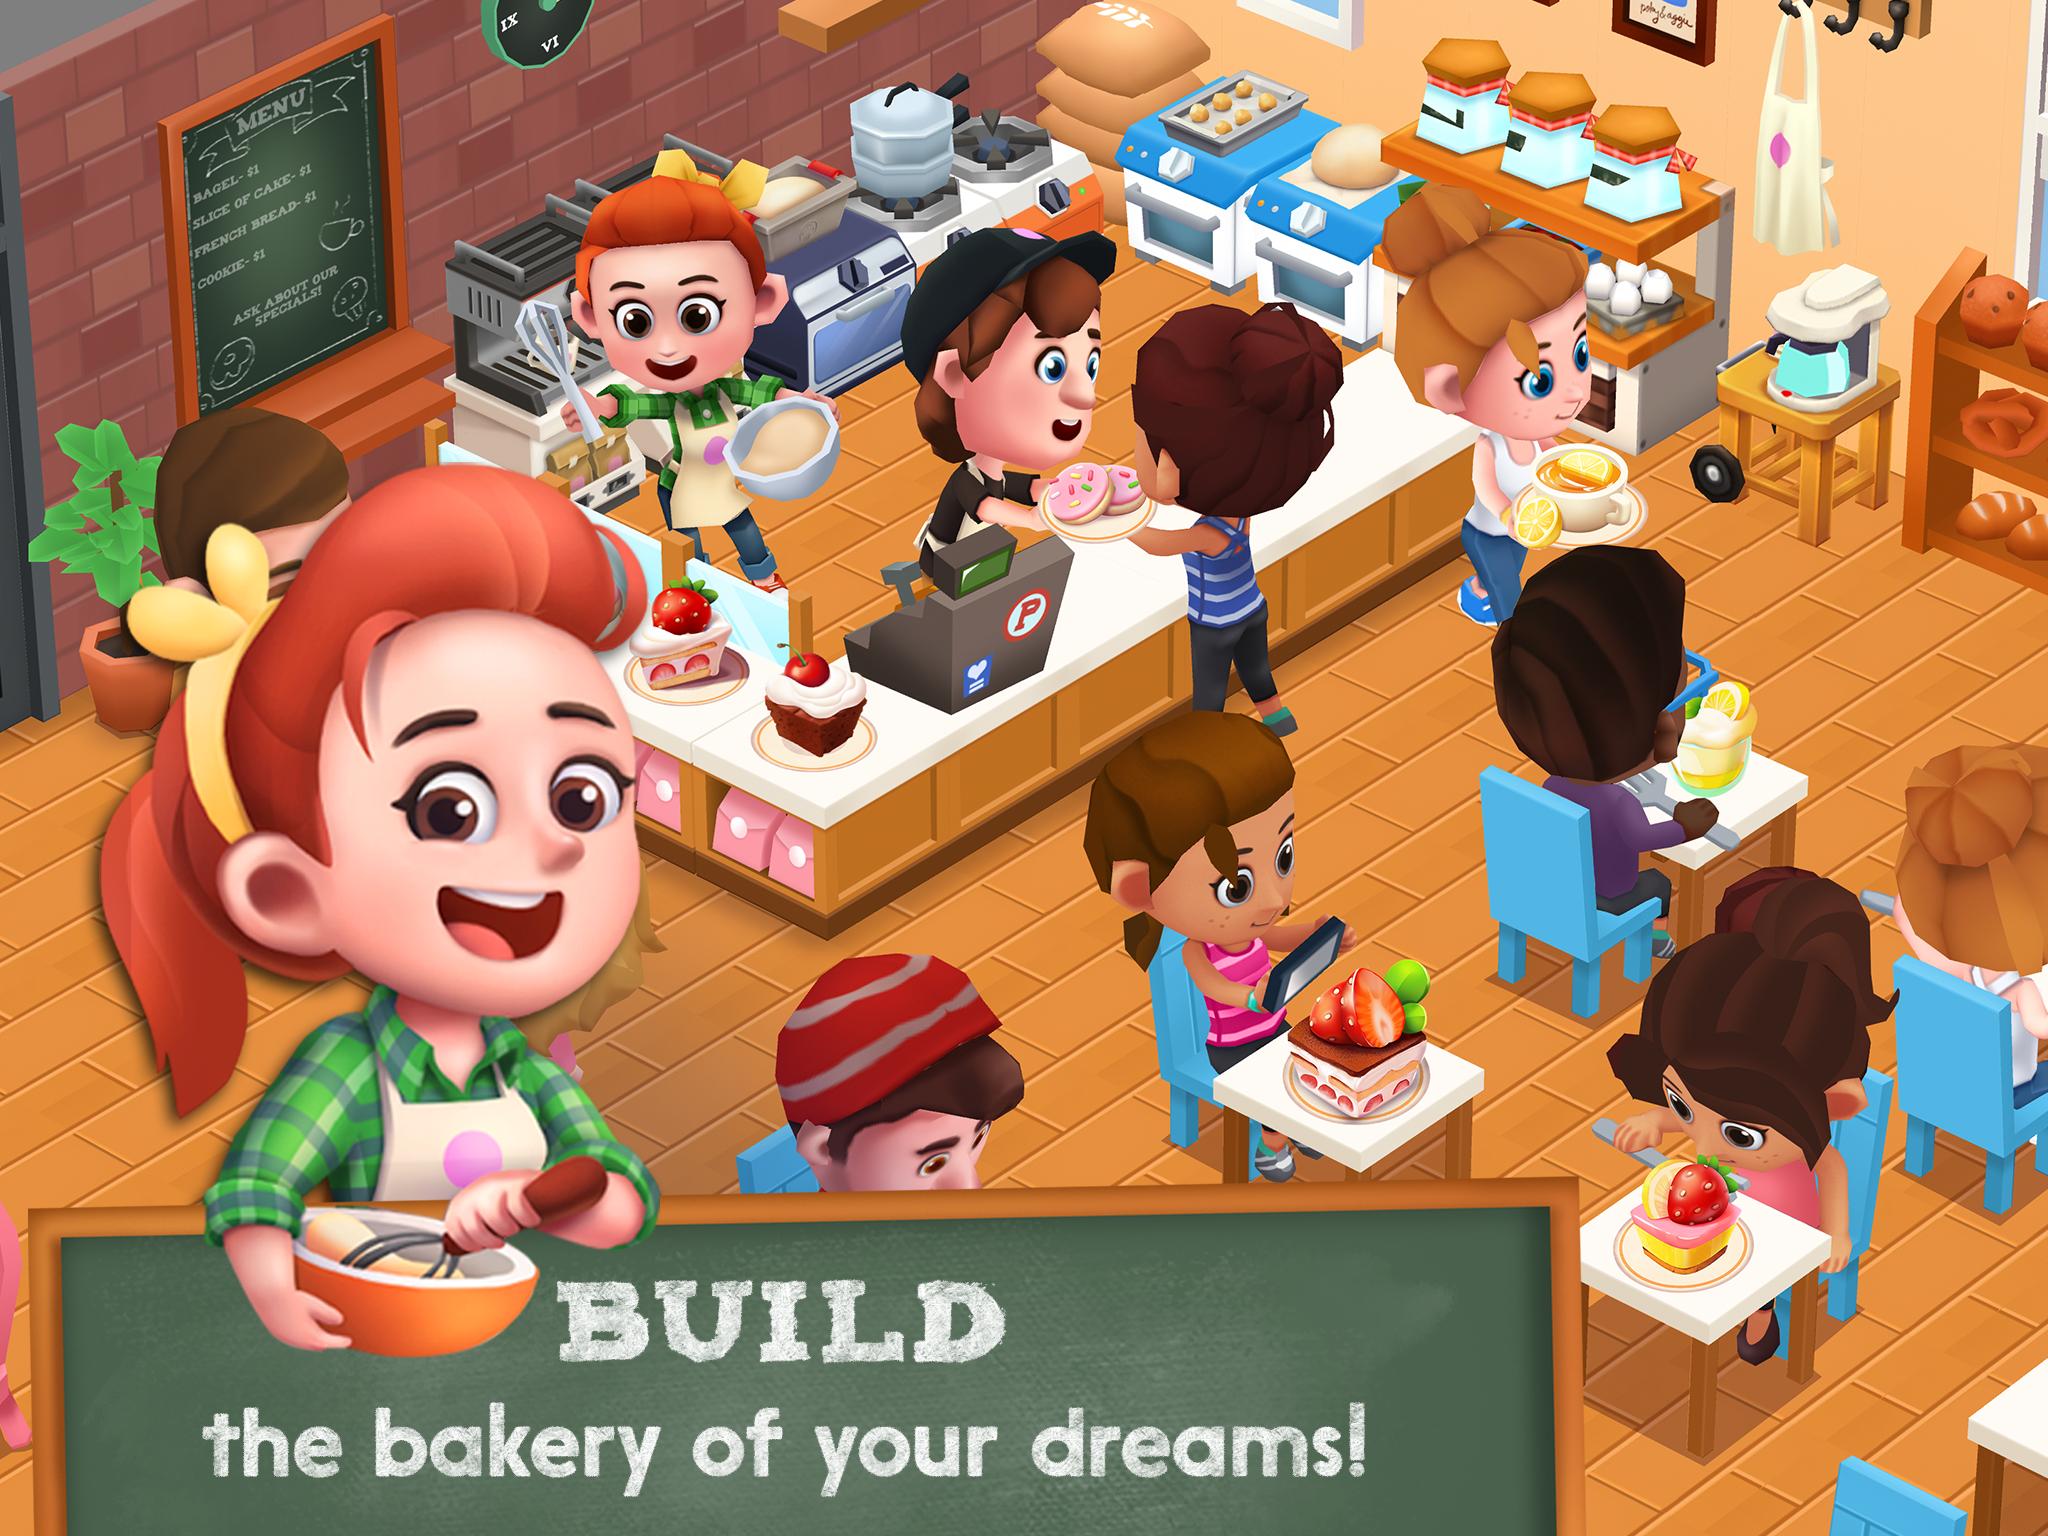 Play game story. Игра Cake Cafe. Bakery story. Baker shop story игра. История кондитерской игра.